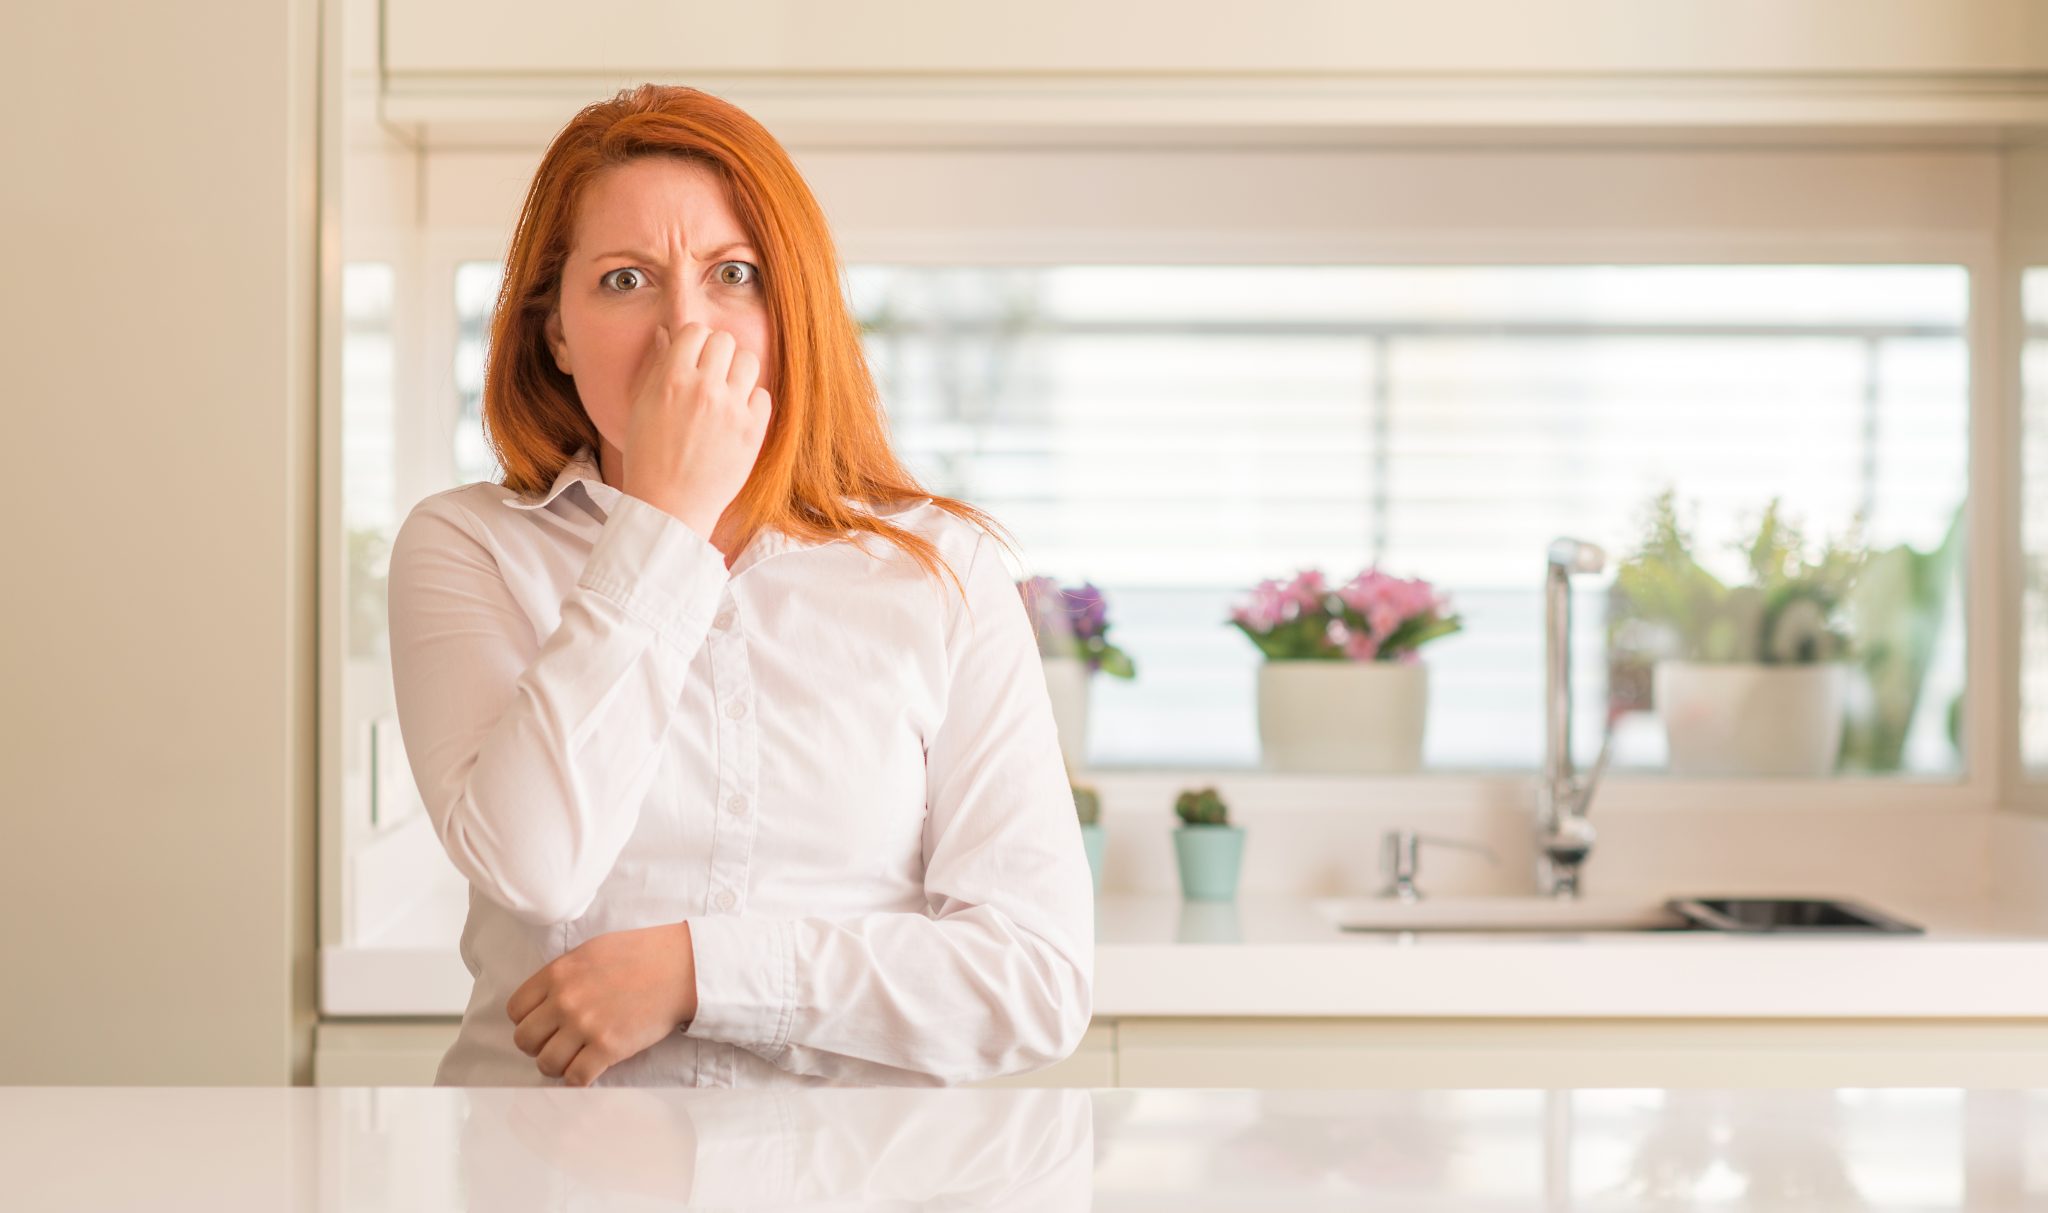 3 Things to Do When Your Kitchen Drain Smells Bad